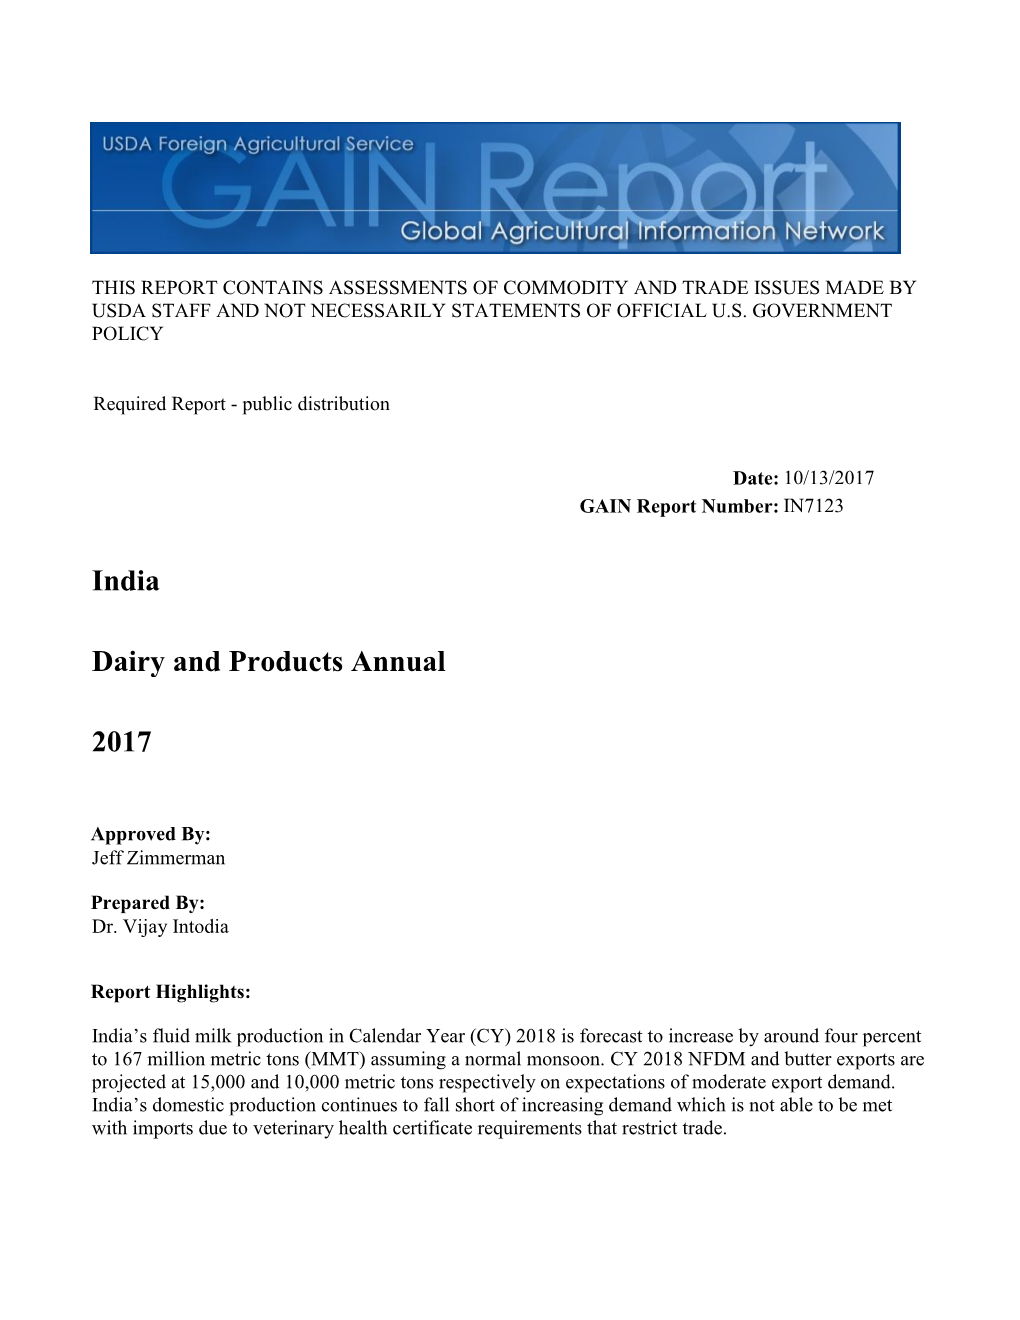 2017 Dairy and Products Annual India